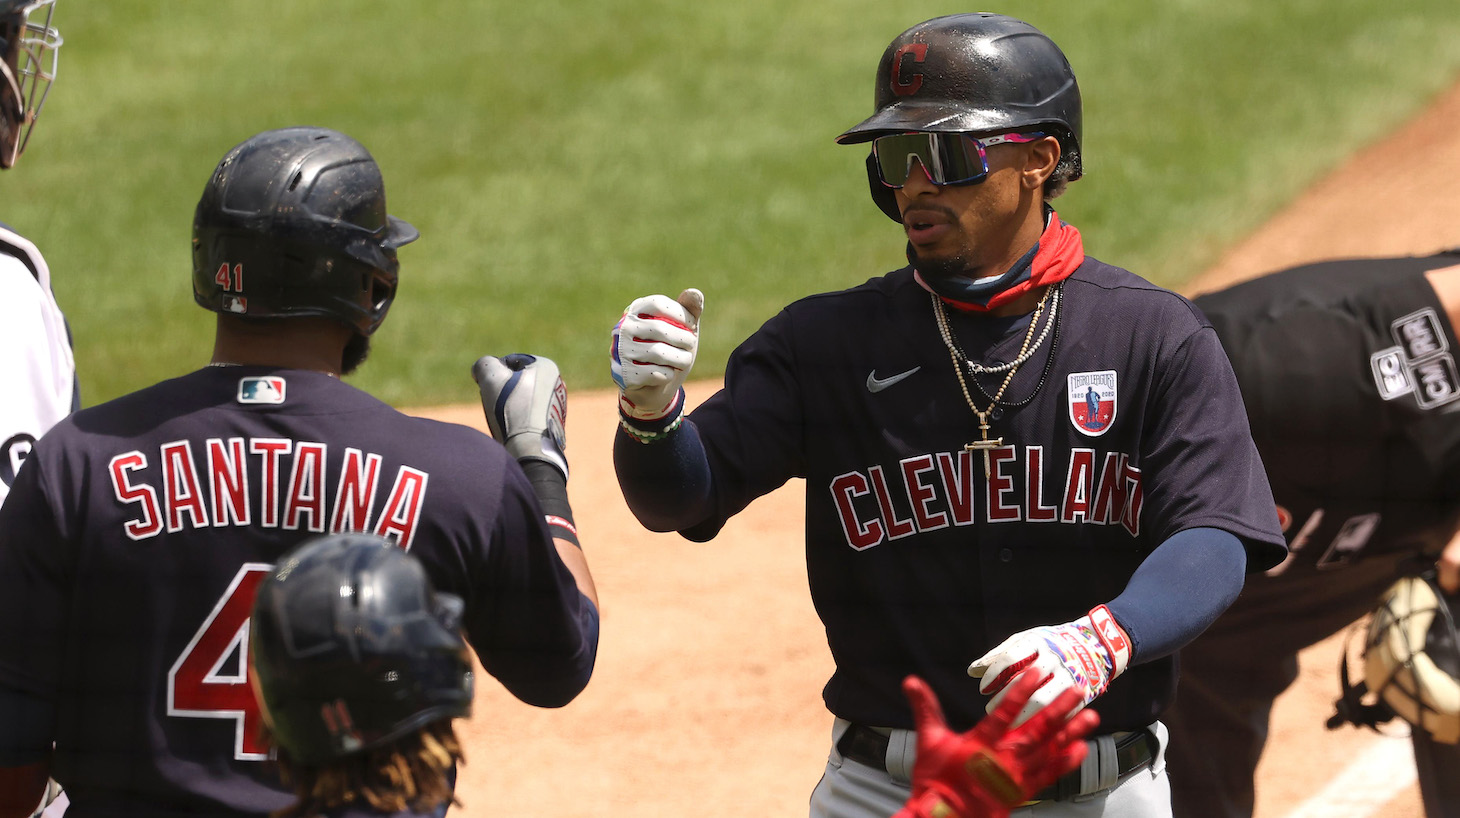 DETROIT, MICHIGAN - AUGUST 16: Francisco Lindor #12 of the Cleveland Indians celebrates his third inning two run home run with Carlos Santana #41 and Jose Ramirez #11 while playing the Detroit Tigers at Comerica Park on August 16, 2020 in Detroit, Michigan. (Photo by Gregory Shamus/Getty Images)